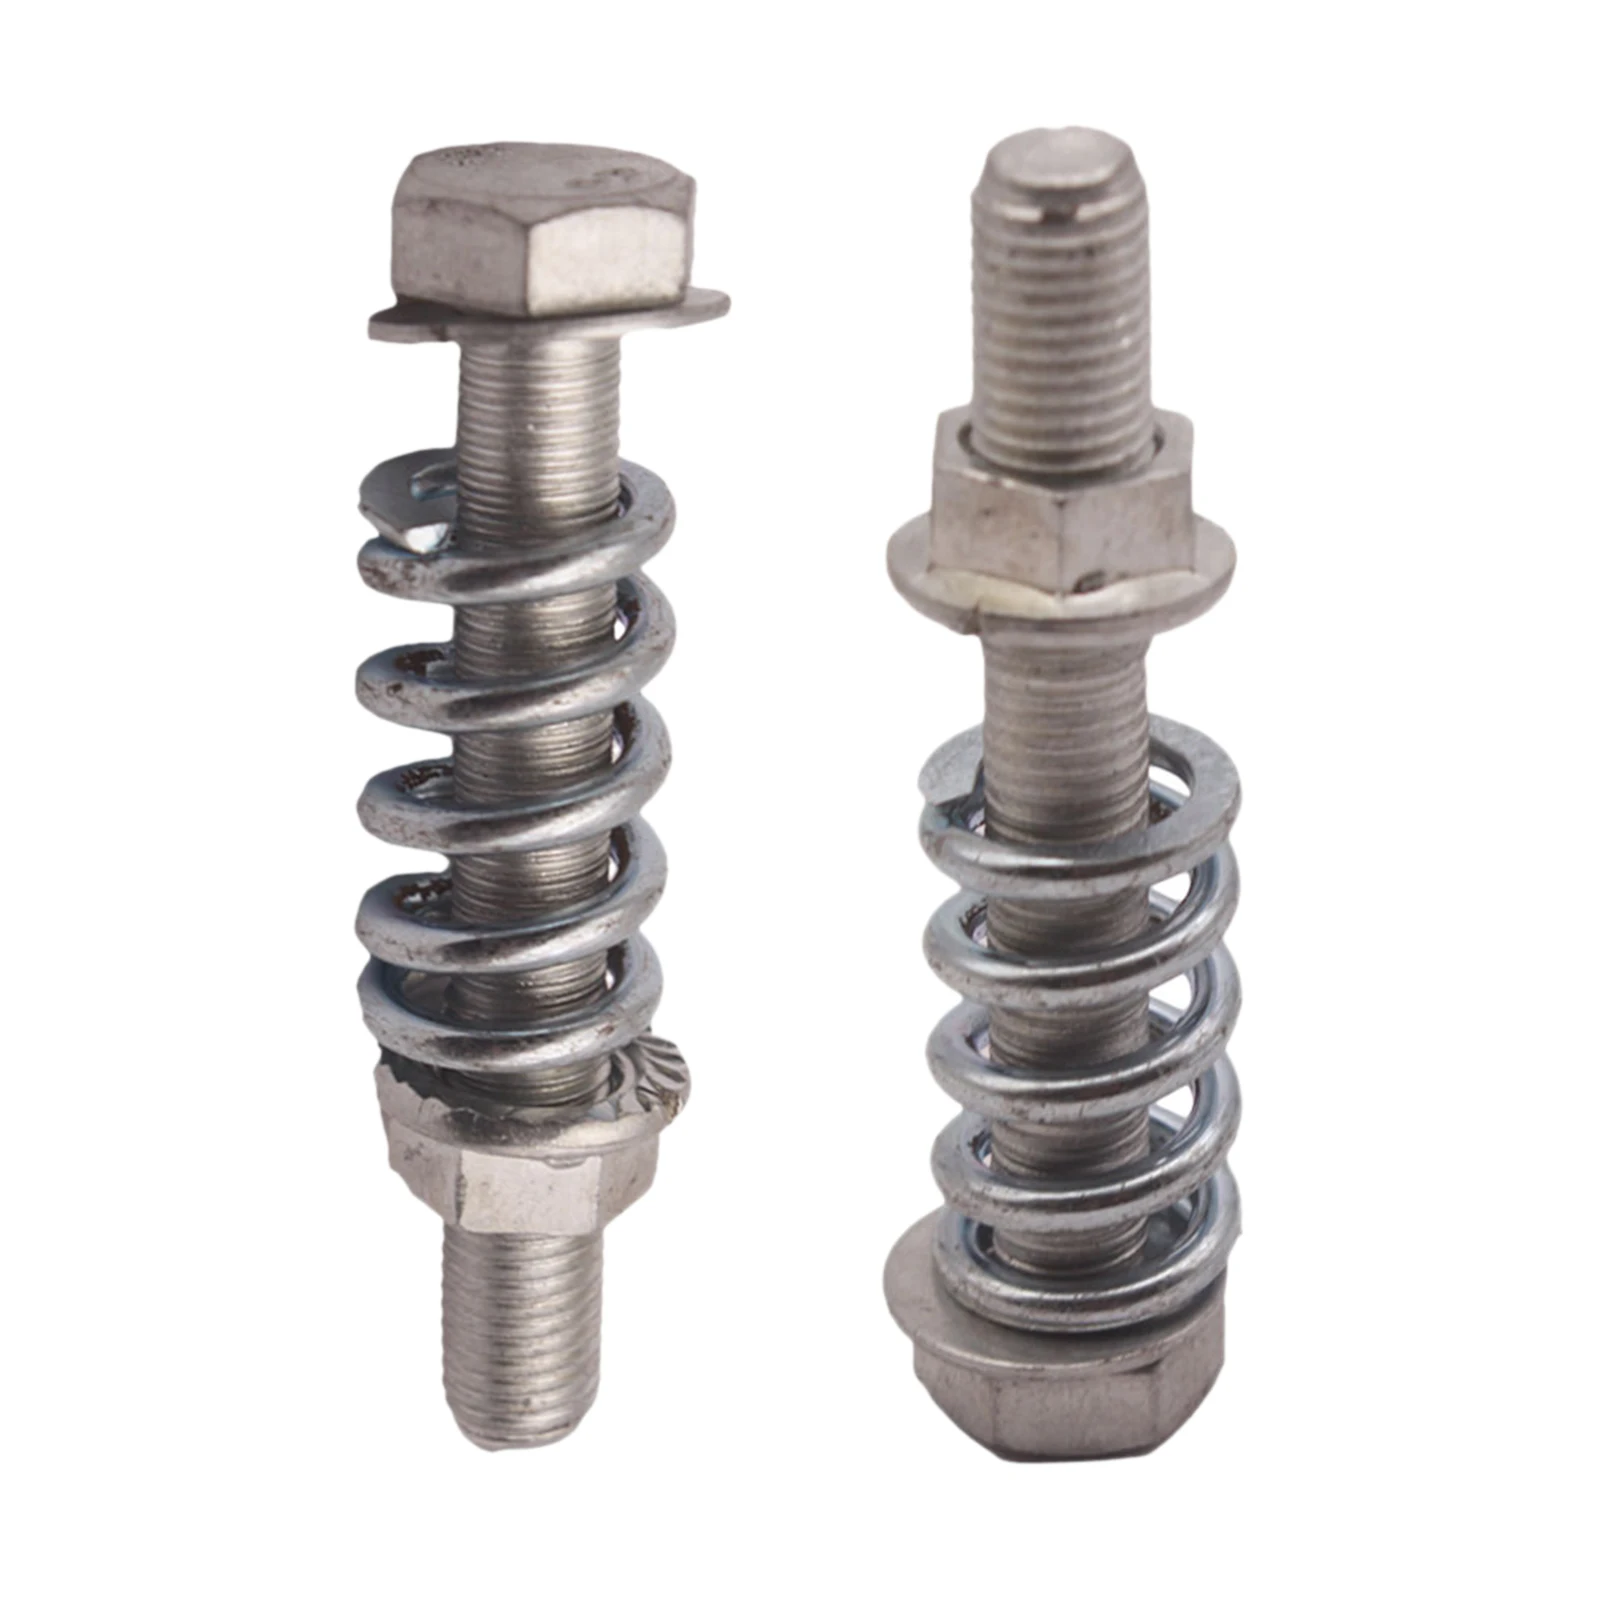 2x 1.5 Exhaust Bolt And Spring High quality pieces Professional